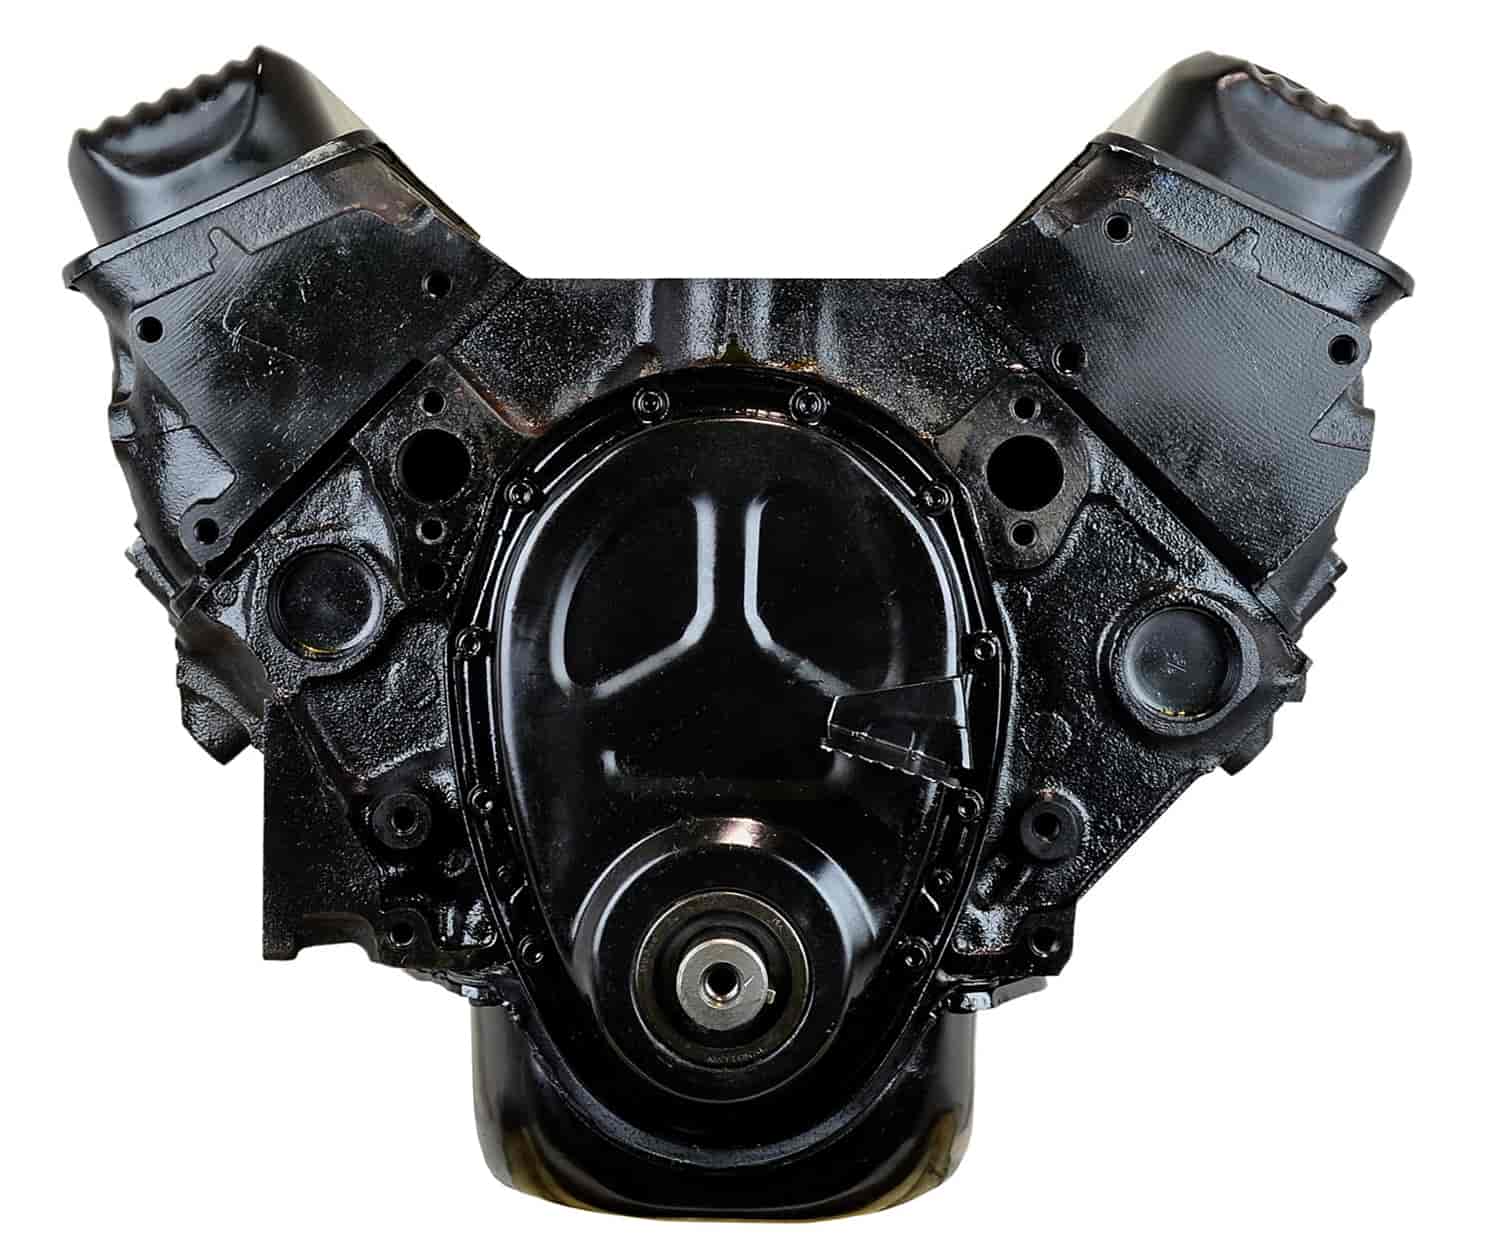 Remanufactured Crate Engine for Marine Applications with 1987-1995 Small Block Chevy 305ci/5.0L